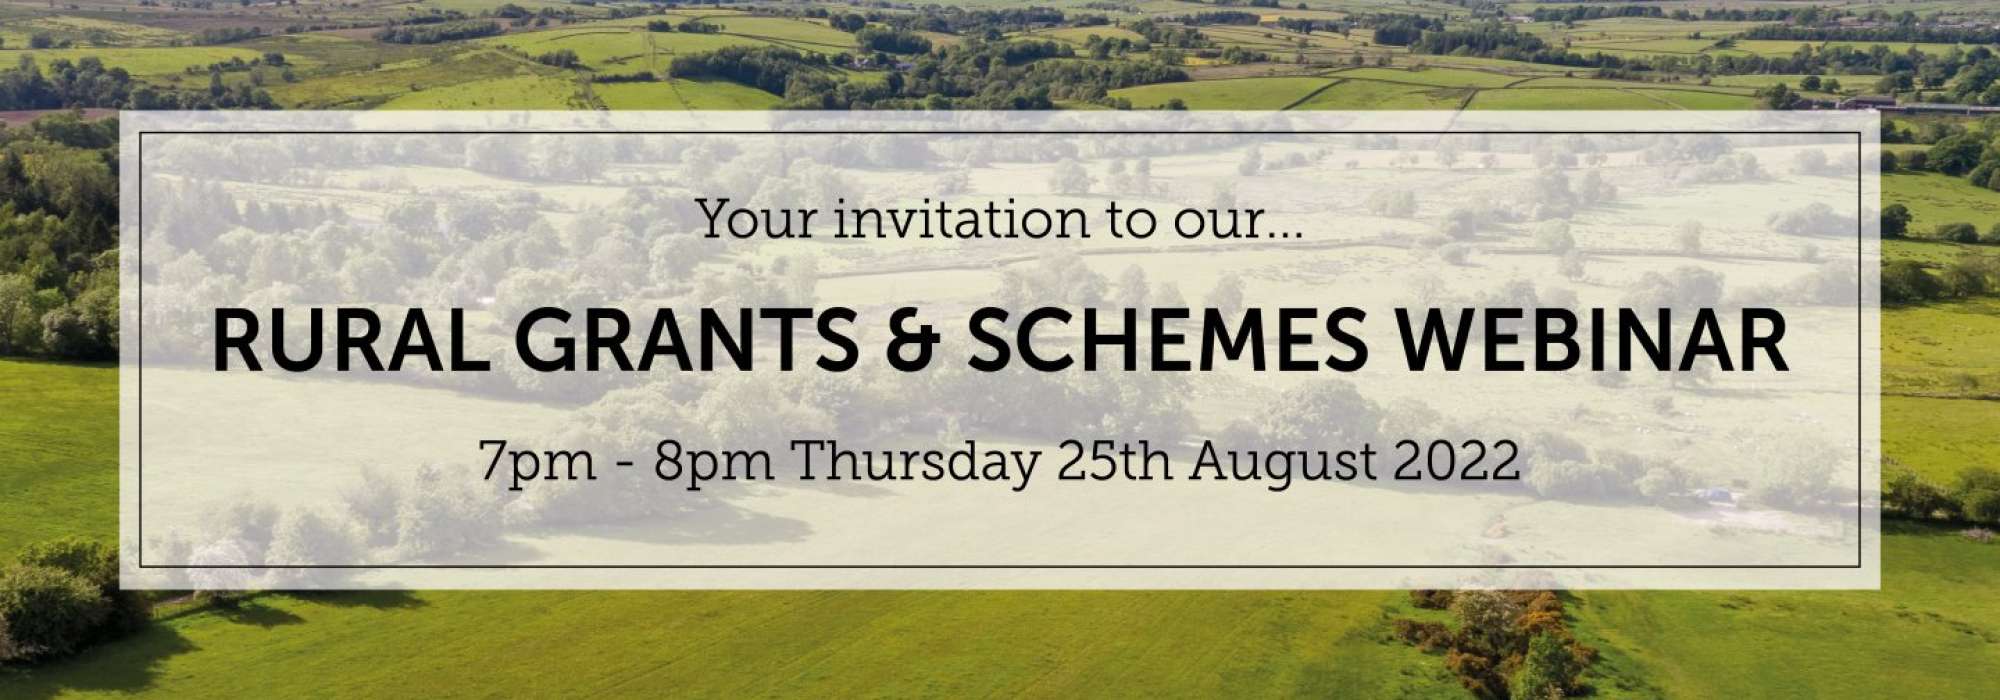 Land image with a text box in the middle saying 'Your Invitation to our Rural Grants and Schemes Seminar'